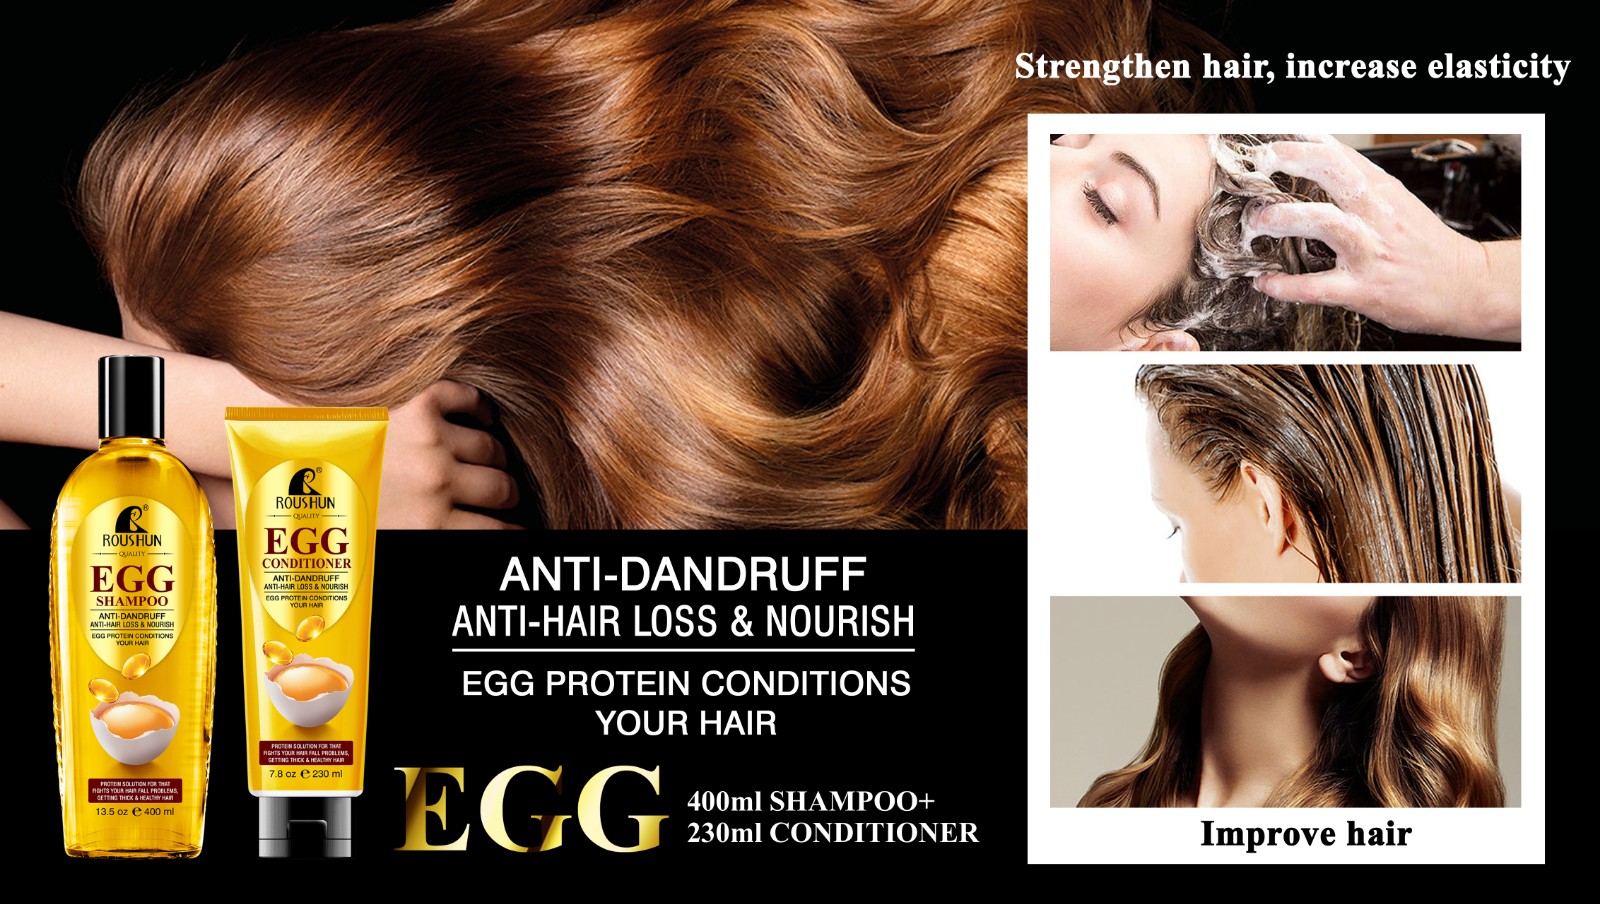 Egg Shampoo and Hair conditioner